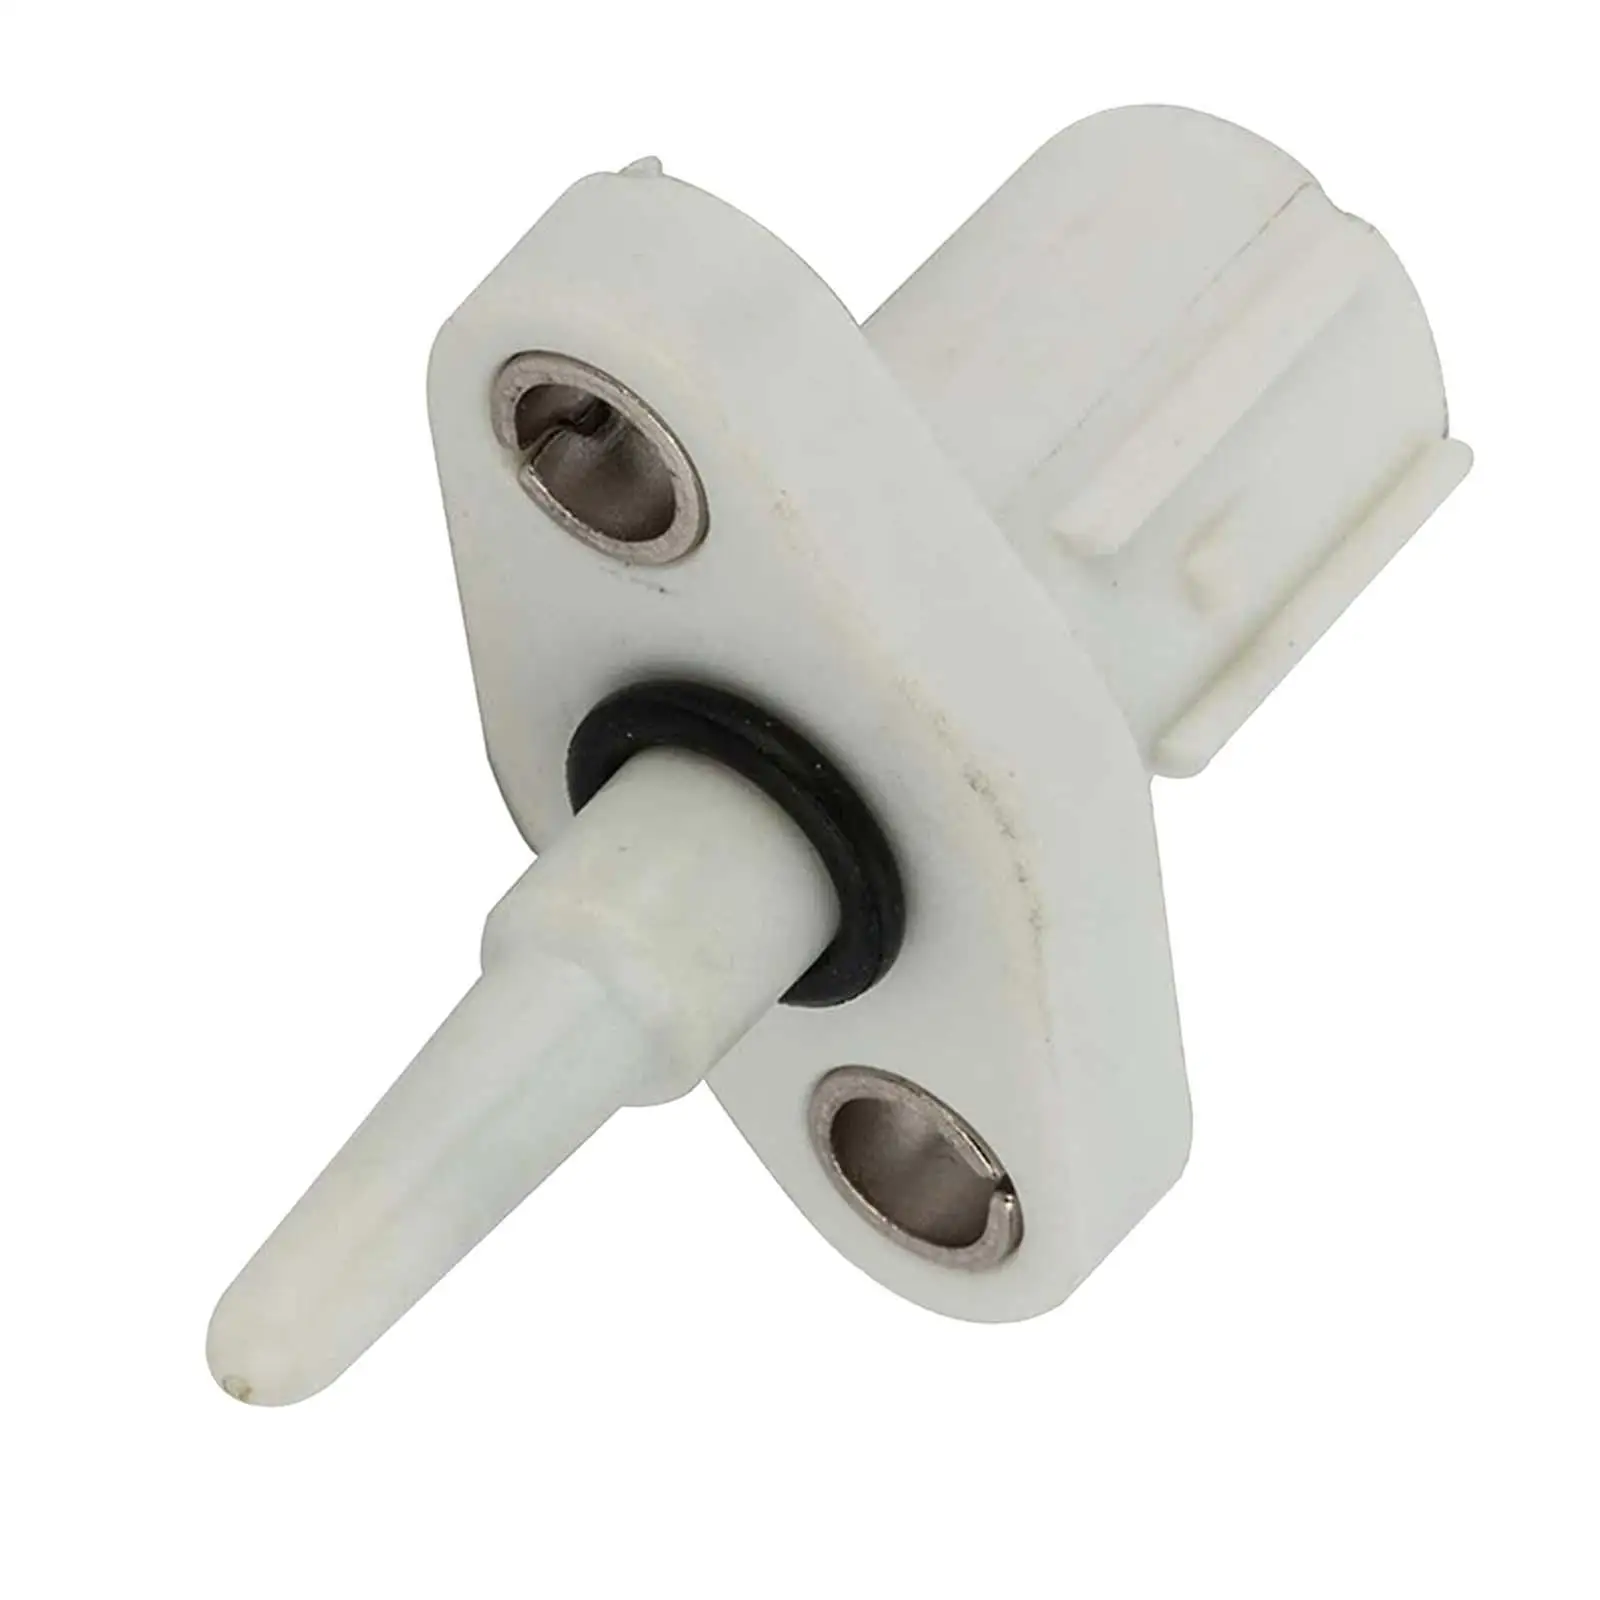 Intake Air Temperature Sensor Assembly Iat Sensor for Honda Accord Stable Performance Easily to Install Car Accessories